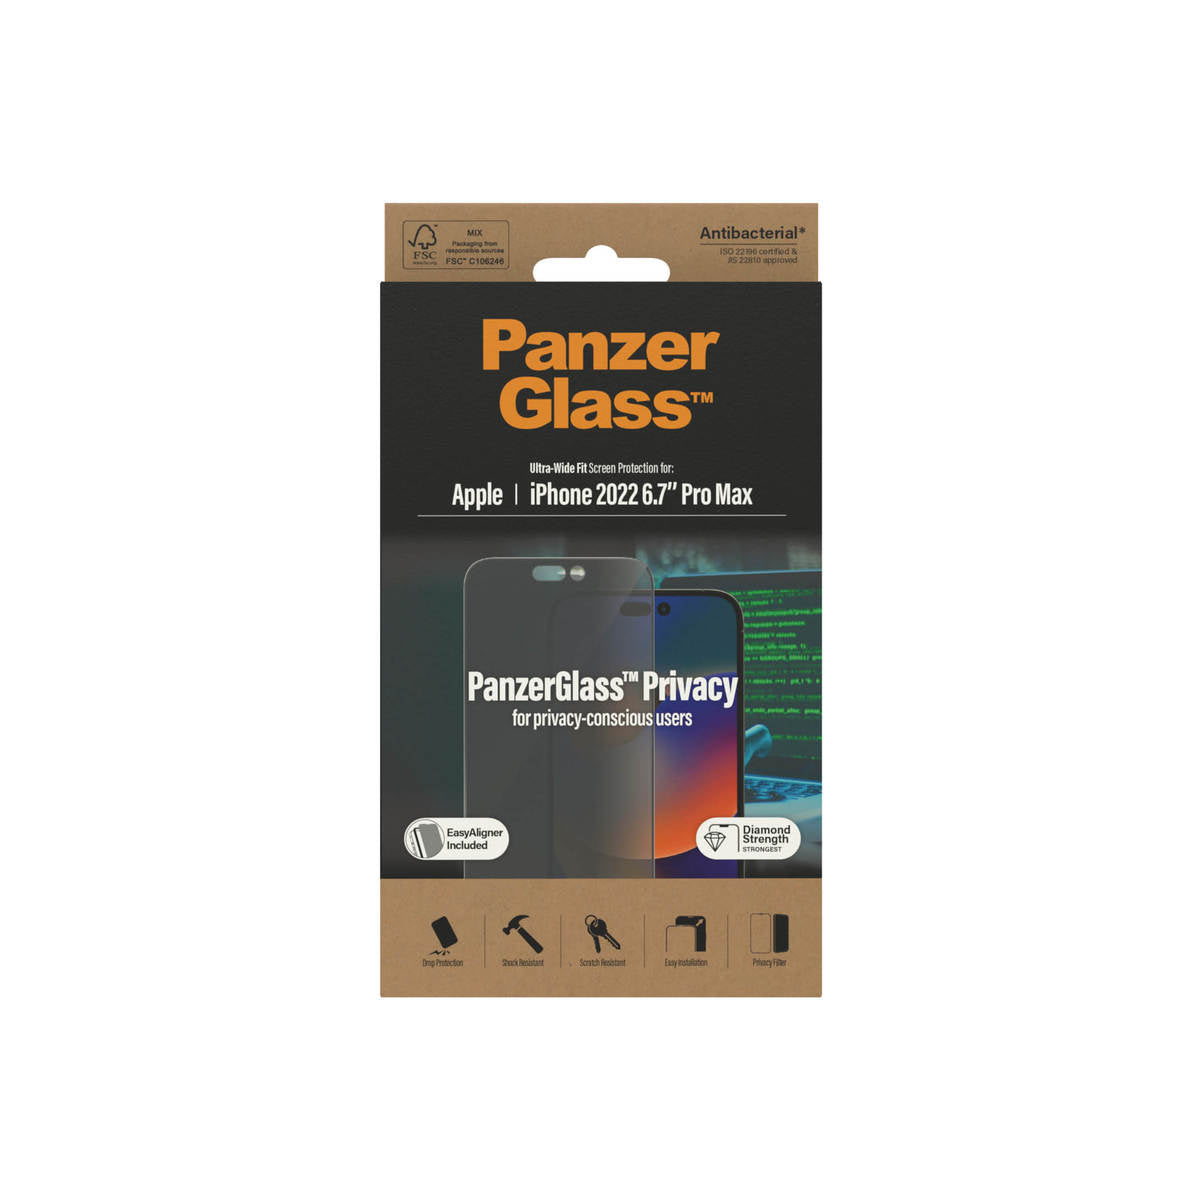 PanzerGlass Ultra-Wide Fit Privacy Antibacterial Screen Protector for iPhone 14 Pro Max.